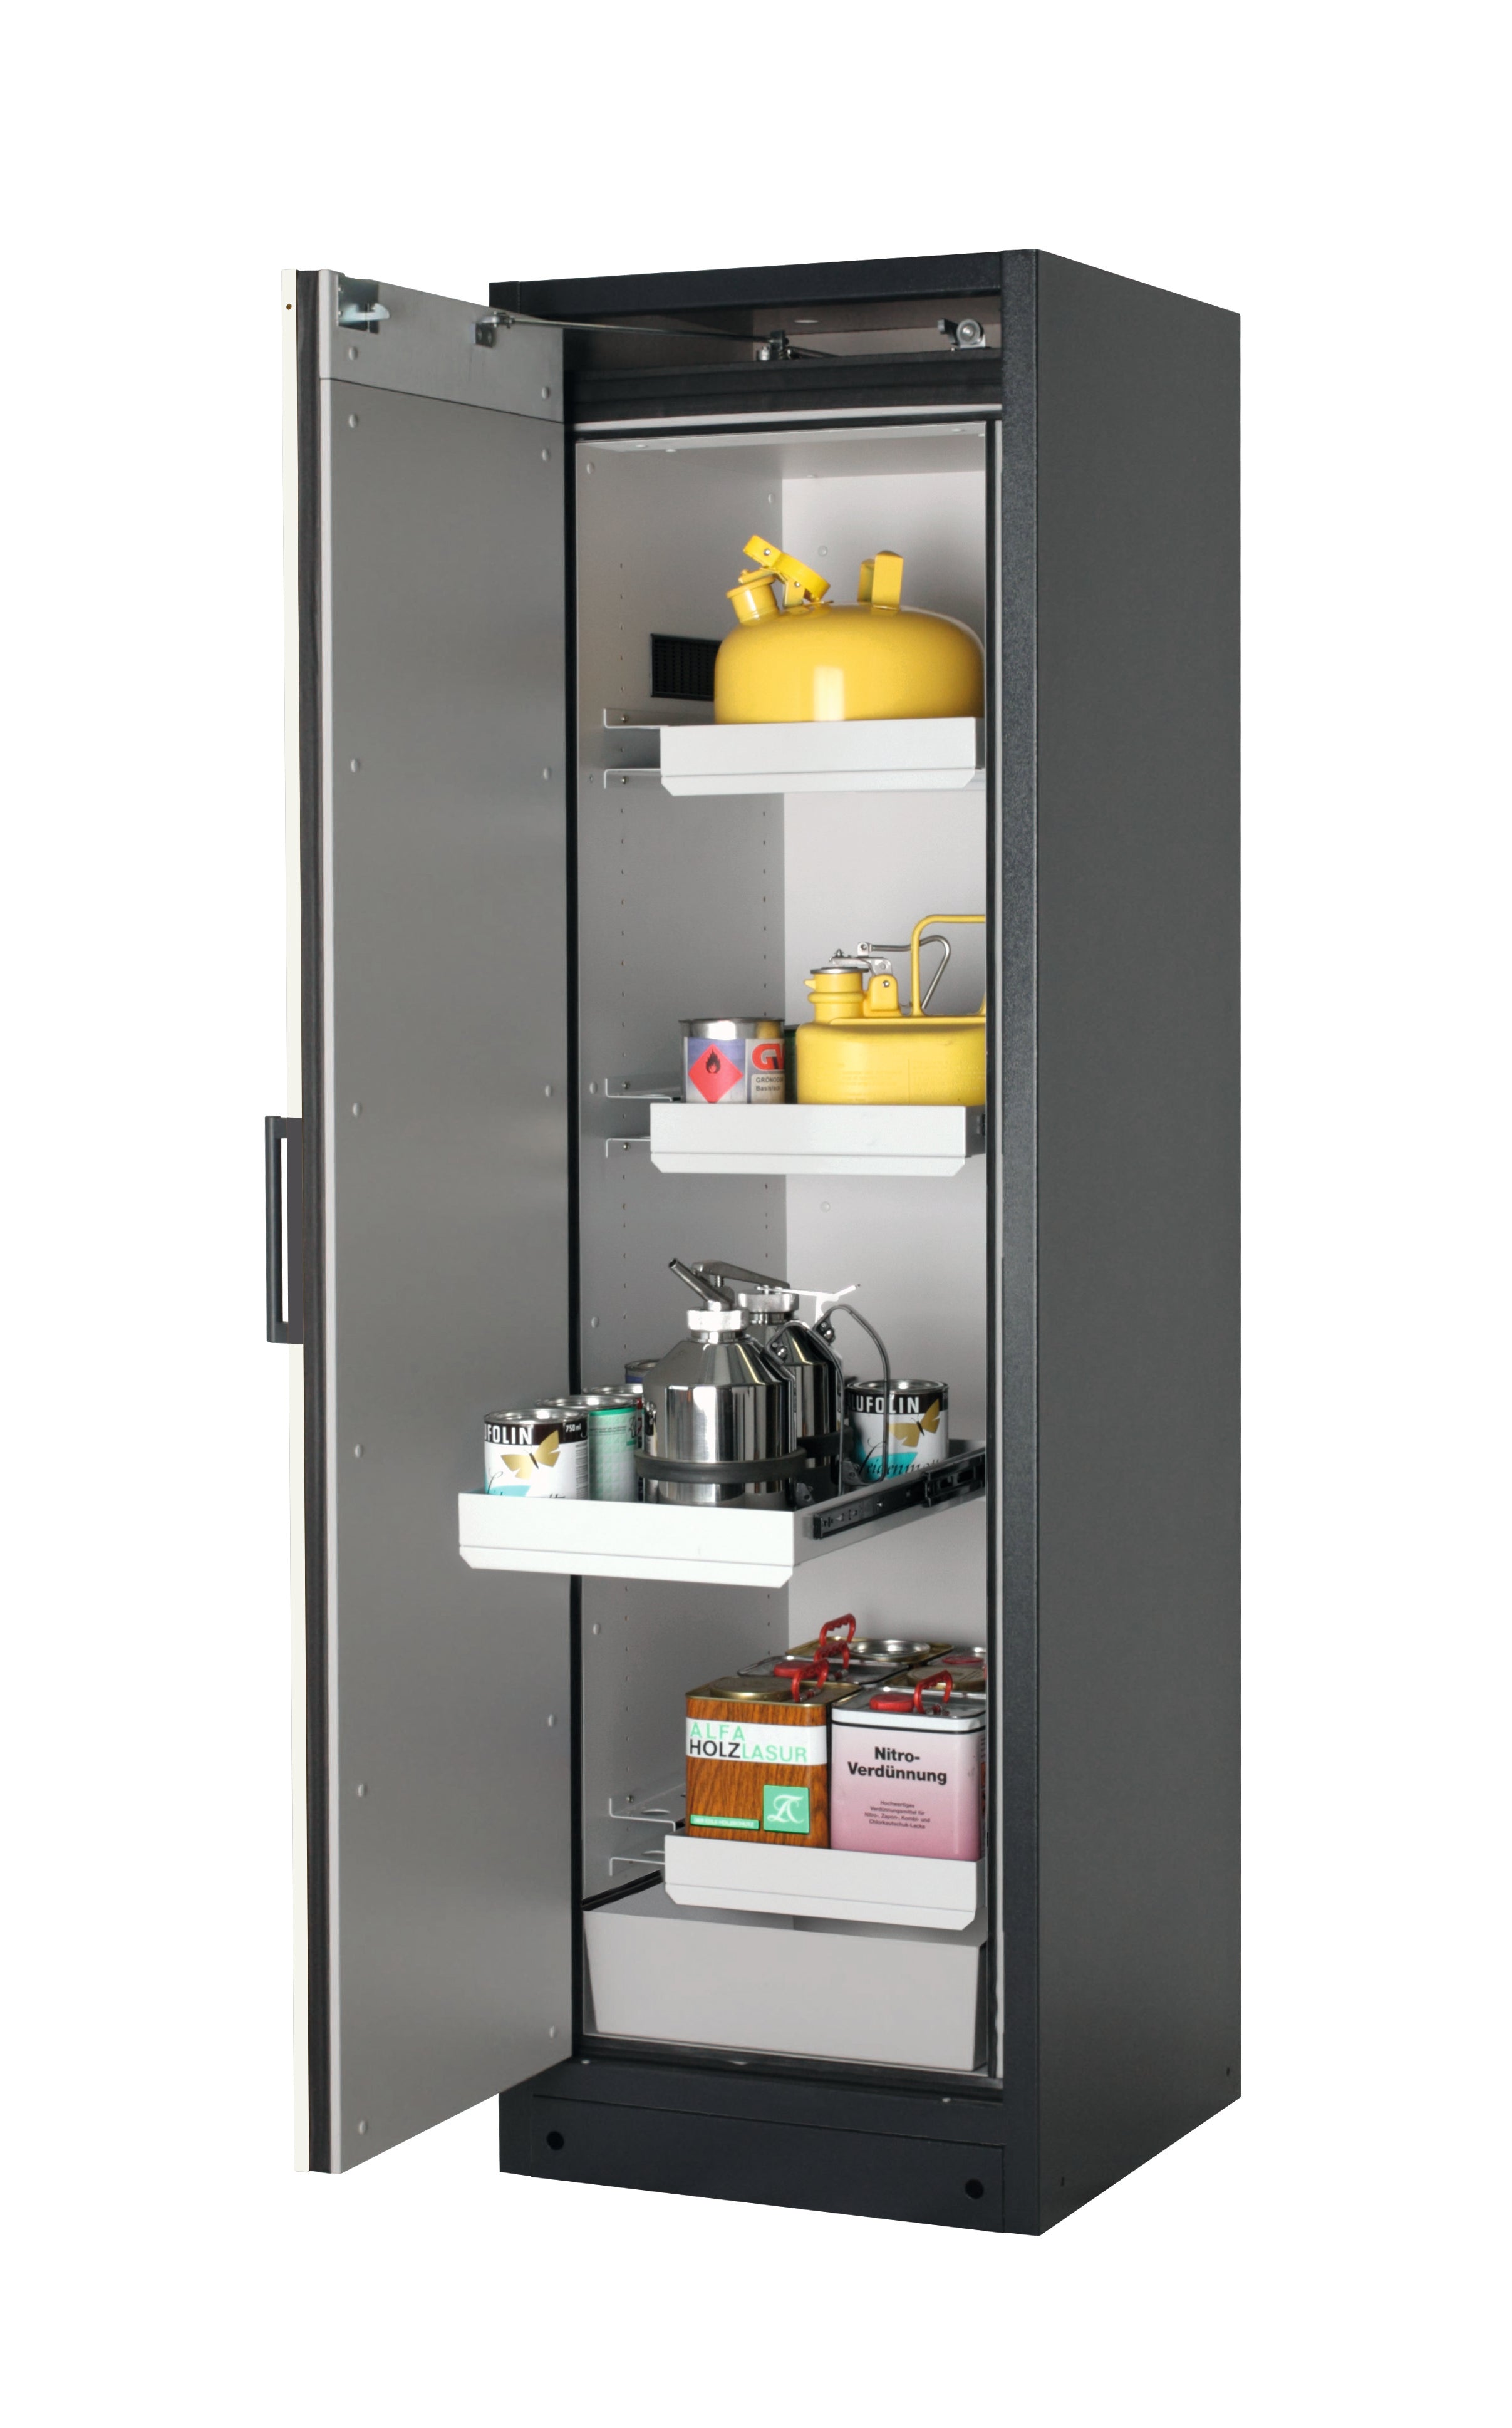 Type 90 safety storage cabinet Q-CLASSIC-90 model Q90.195.060 in asecos silver with 3x drawer (standard) (sheet steel),